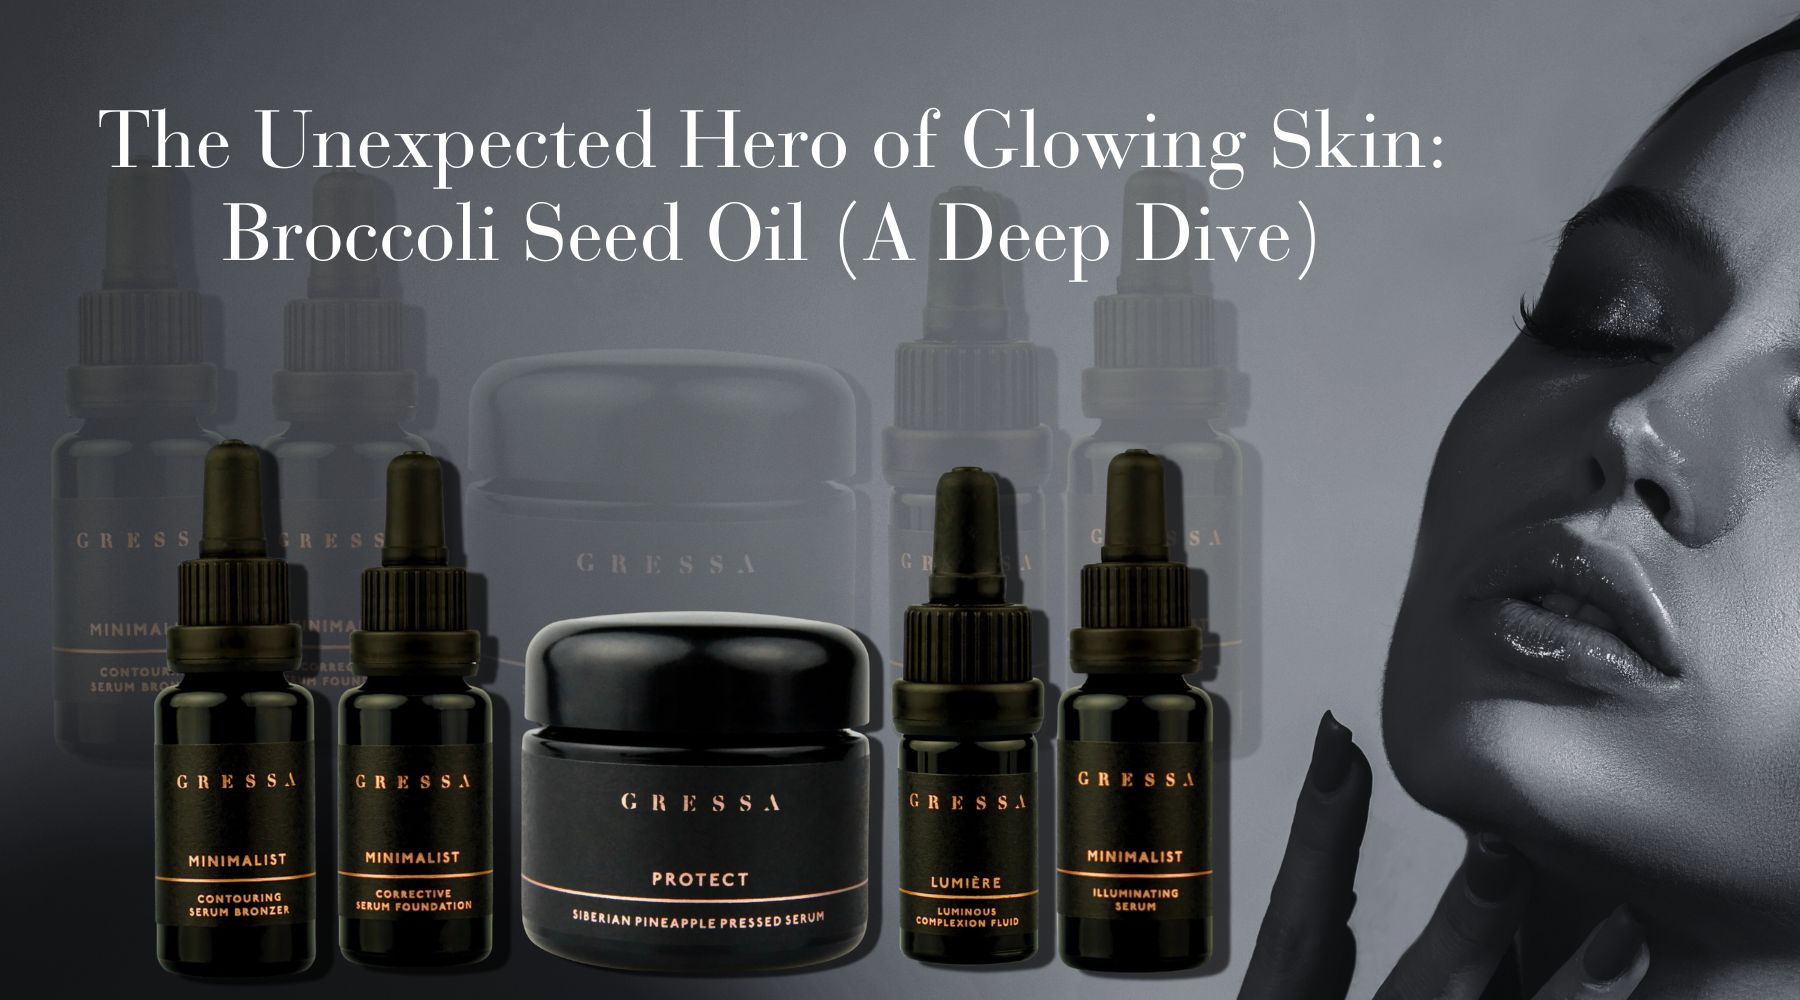 The Unexpected Hero of Glowing Skin: Broccoli Seed Oil (A Deep Dive) - Gressa Skin